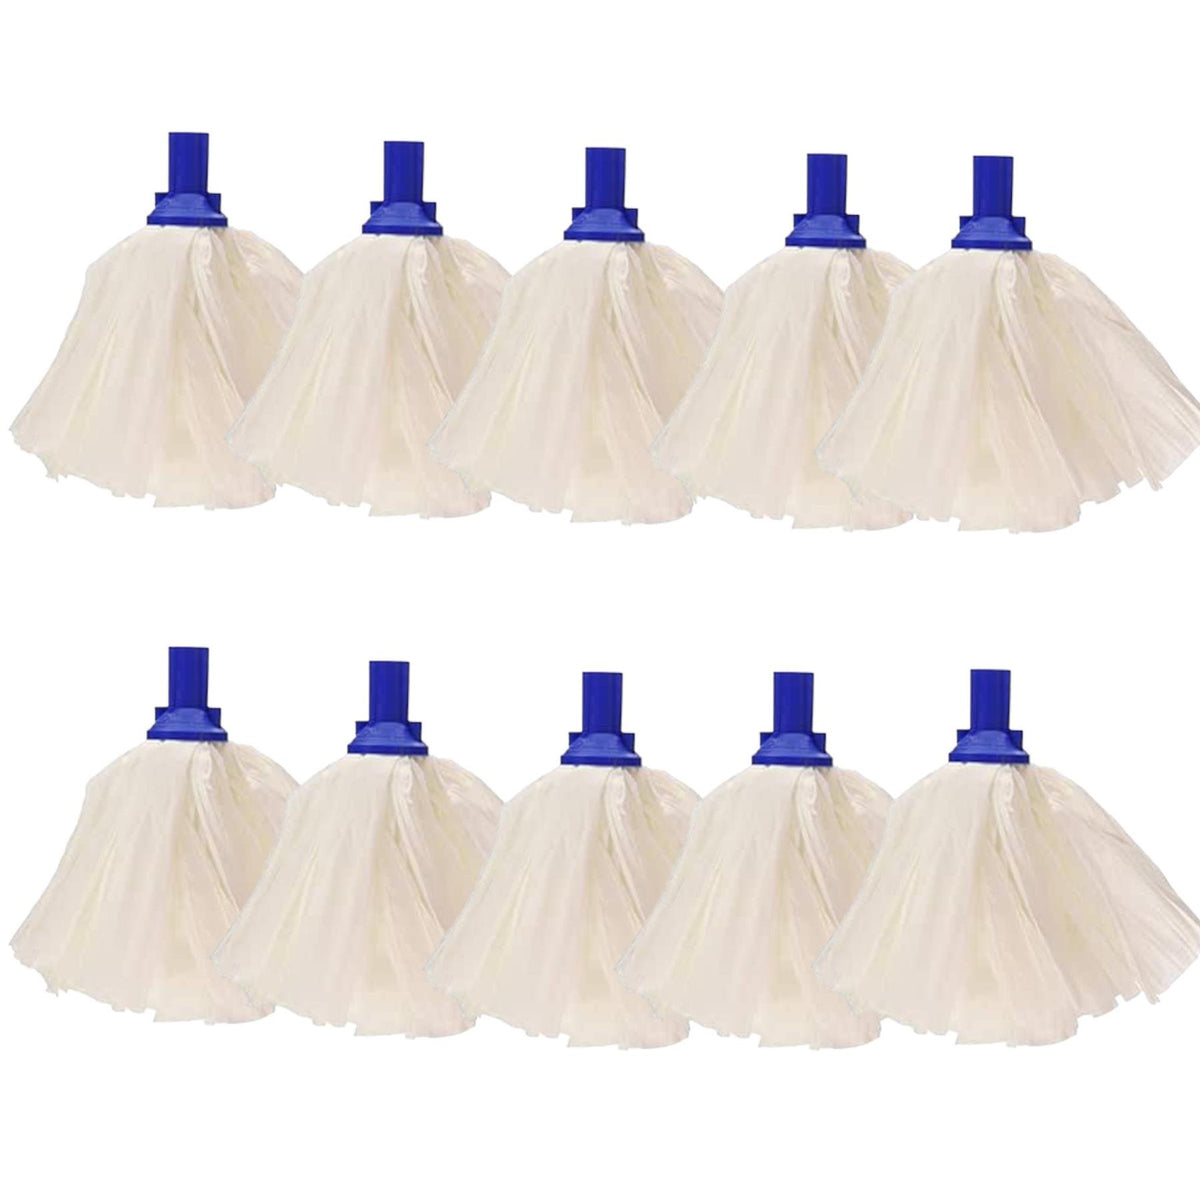 Exel Disposable Mop Heads 117 Grams Pack of 10 Blue